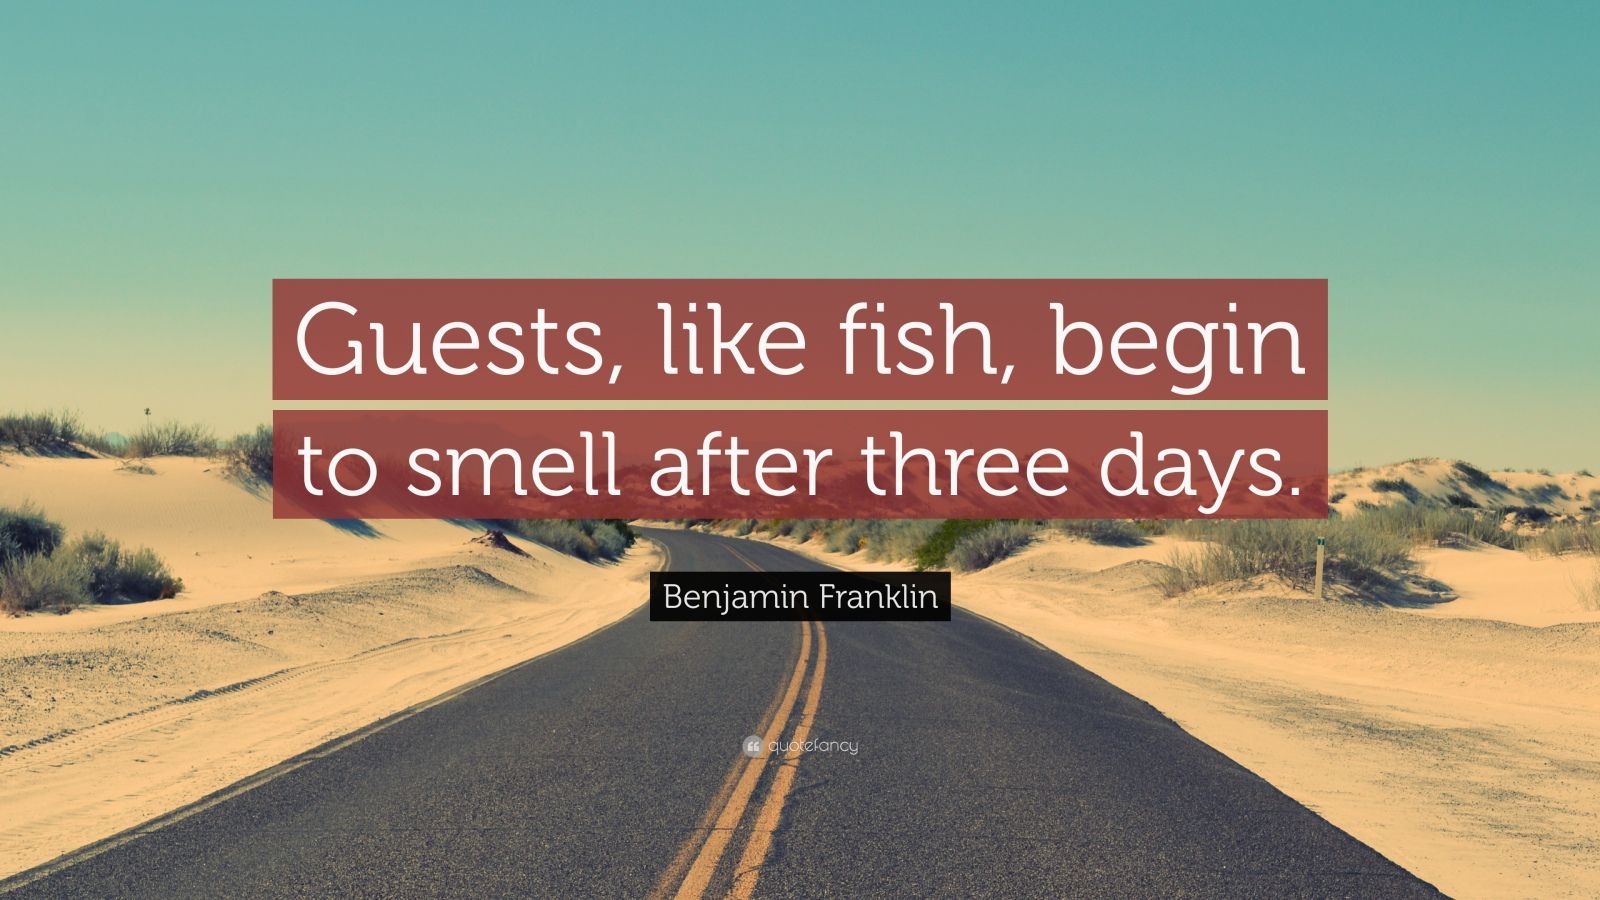 Benjamin Franklin Quote: “Guests, like fish, begin to smell after